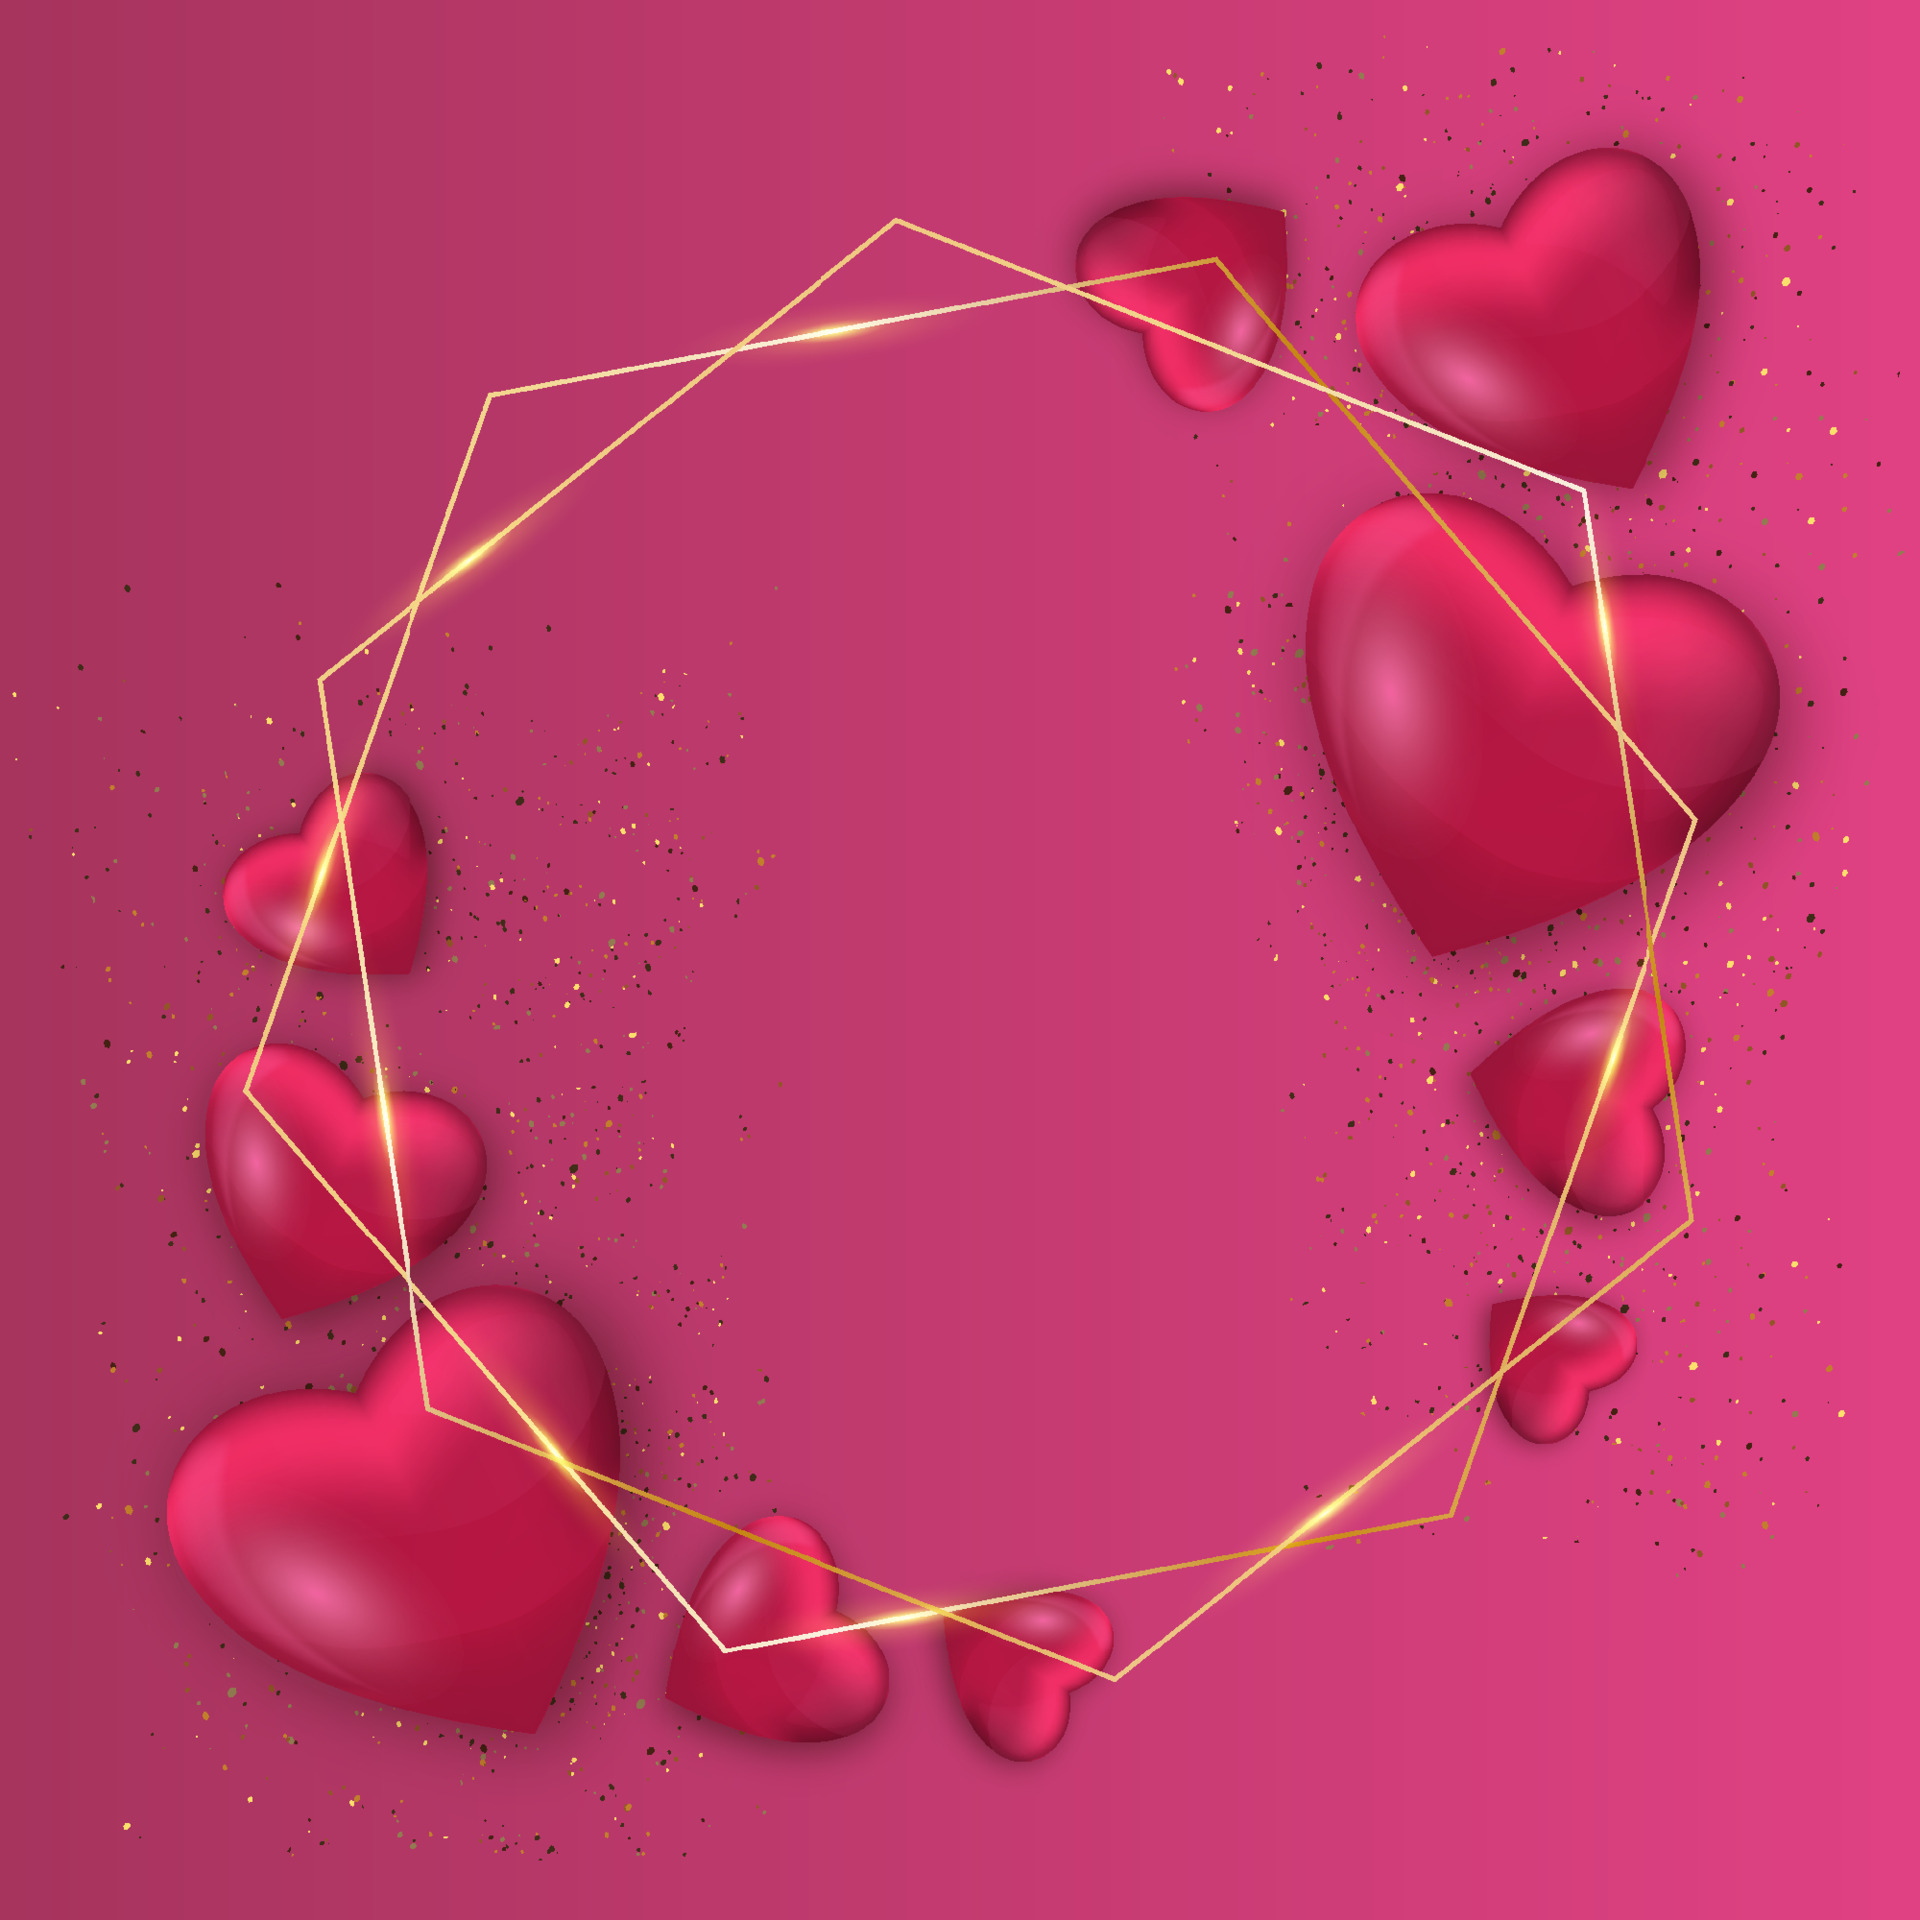 Illustrated 3d Red Metallic Heart On Soft White Perfect For Valentine's Day  Wallpaper And Greeting Cards Powerpoint Background For Free Download -  Slidesdocs